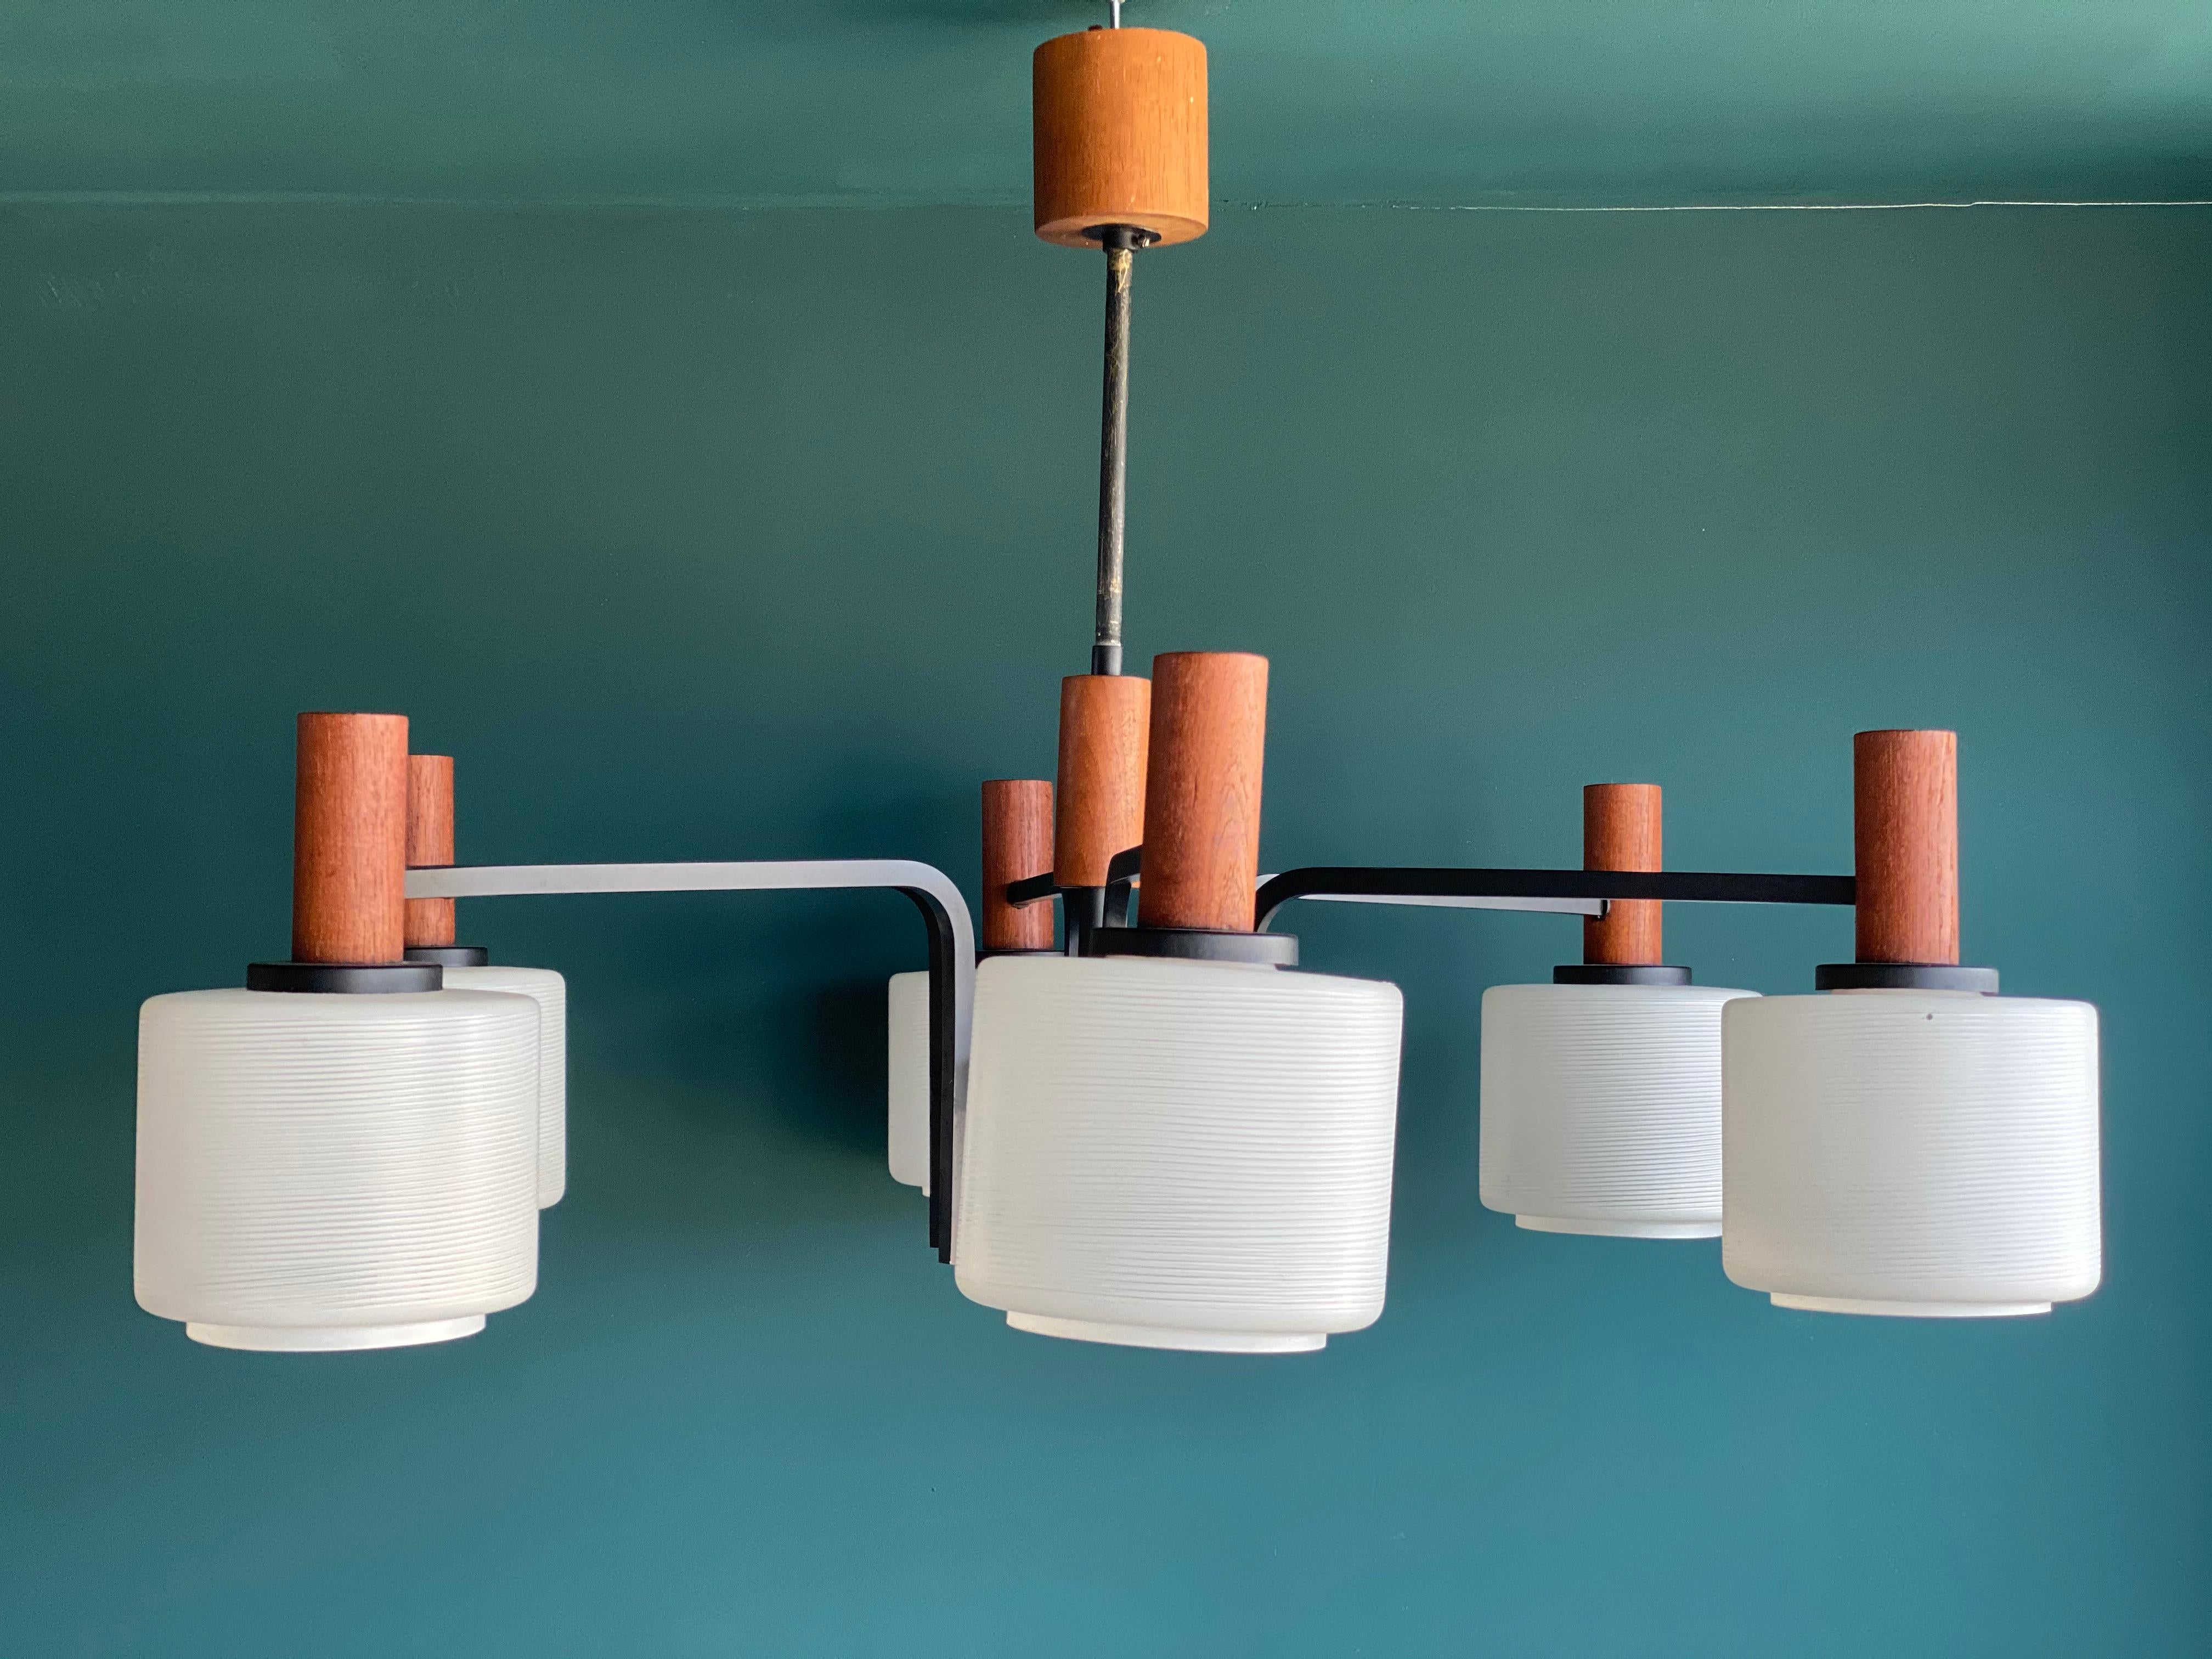 Beautiful Danish design chandelier from the 1960s. This typical Scandinavian midcentury piece has six chandelier arms with white lacquered fluted glass shades, which are held together by teak veneer covered joints. This chandelier is timeless in its